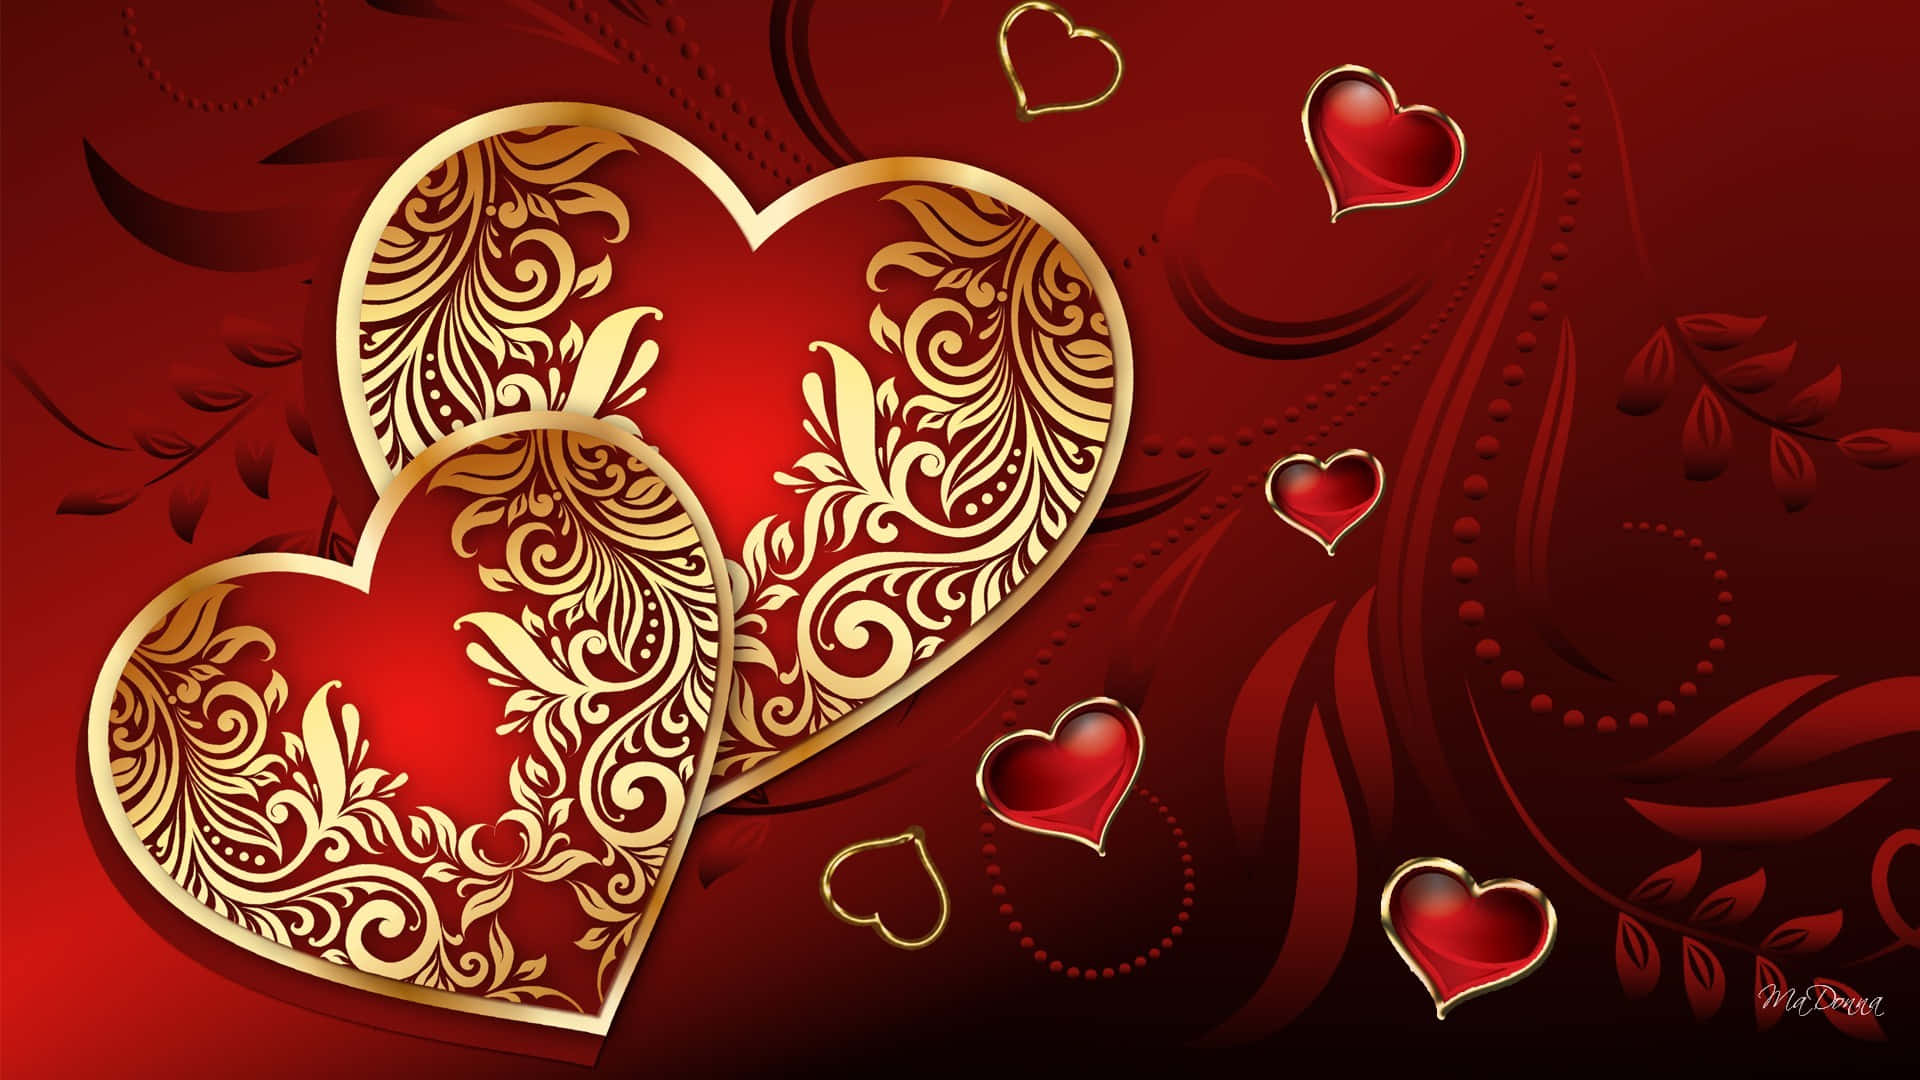 Love Is In The Air With This Beautiful Red Heart Wallpaper